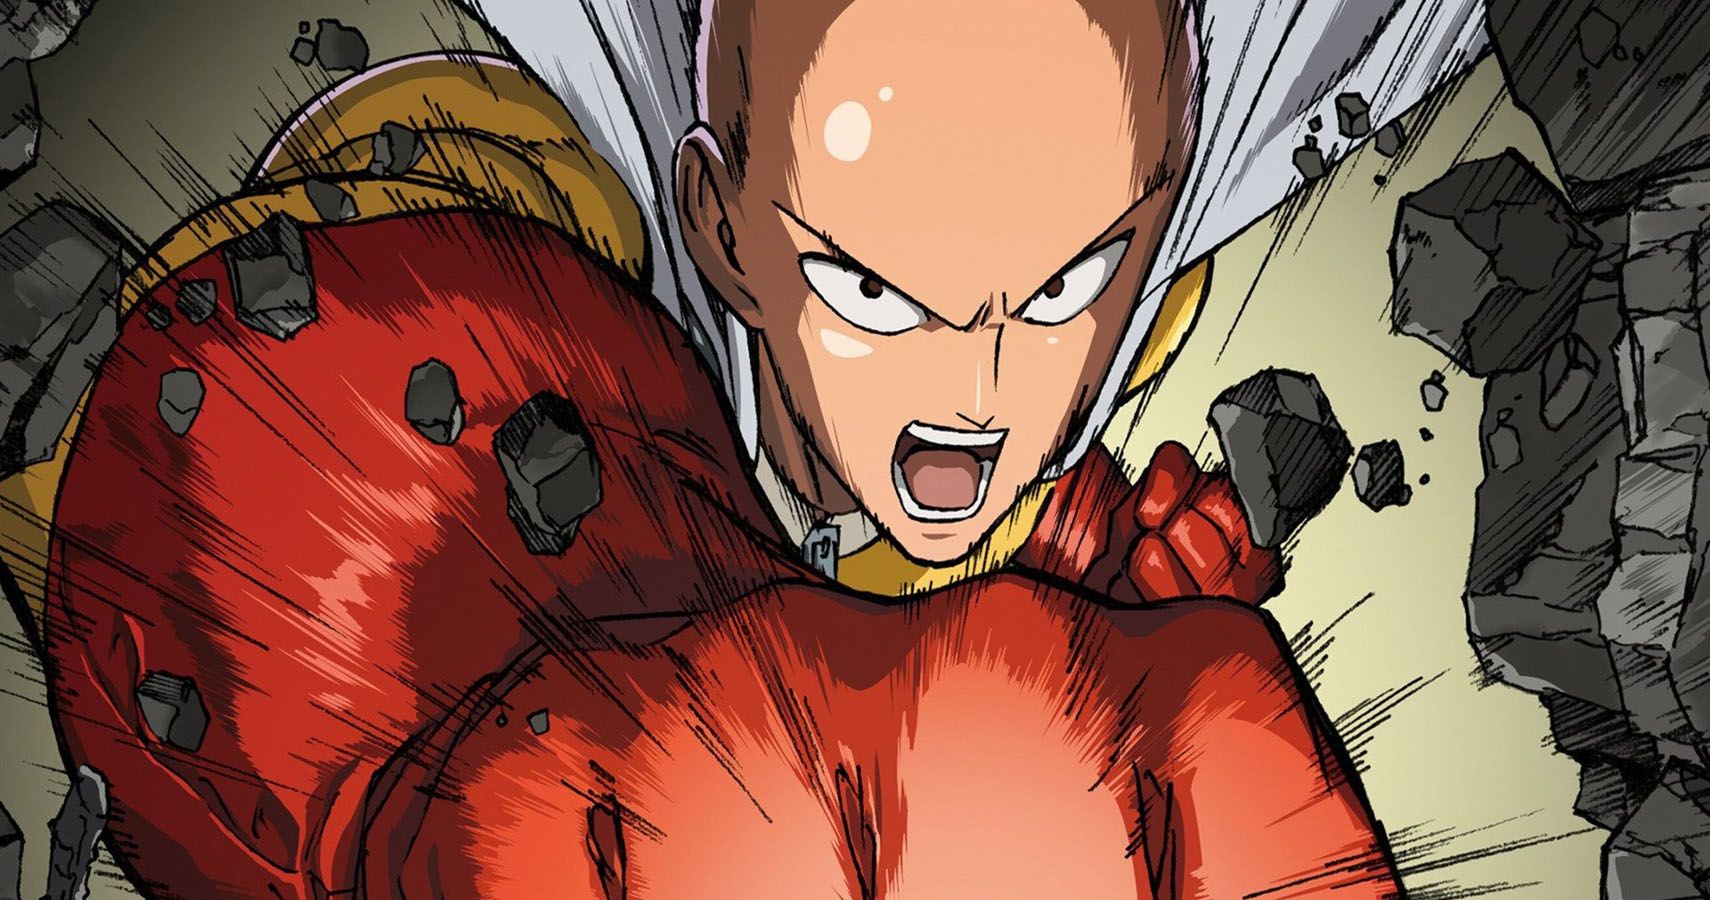 3. "Saitama" from One Punch Man - wide 5